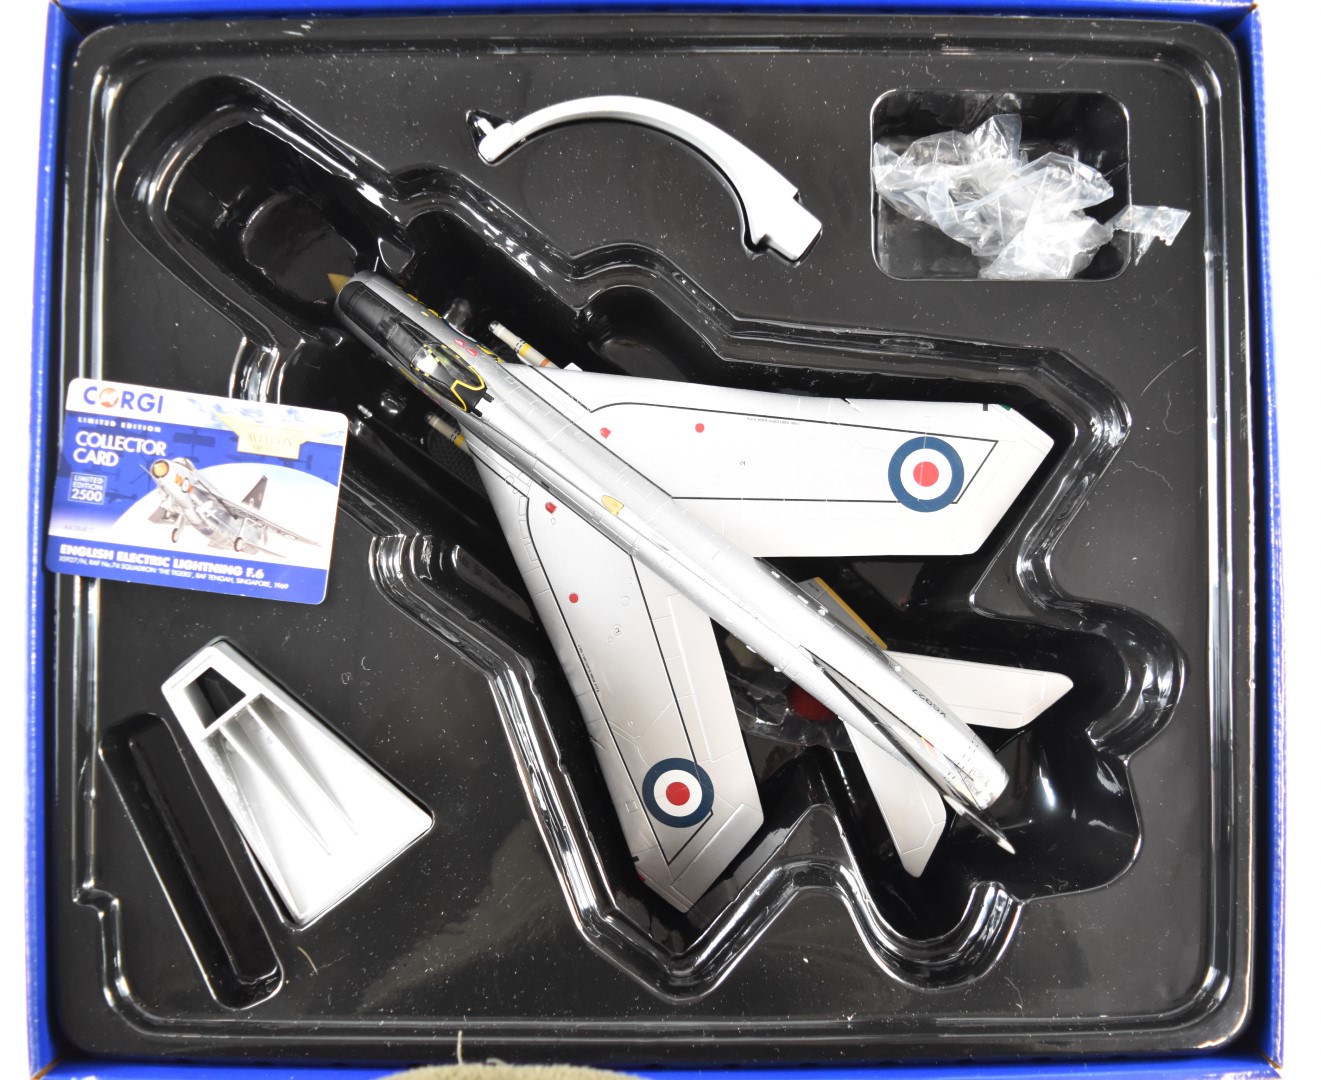 Corgi The Aviation Archive limited edition 1:48 scale diecast model English Electric Lightning F. - Image 2 of 2